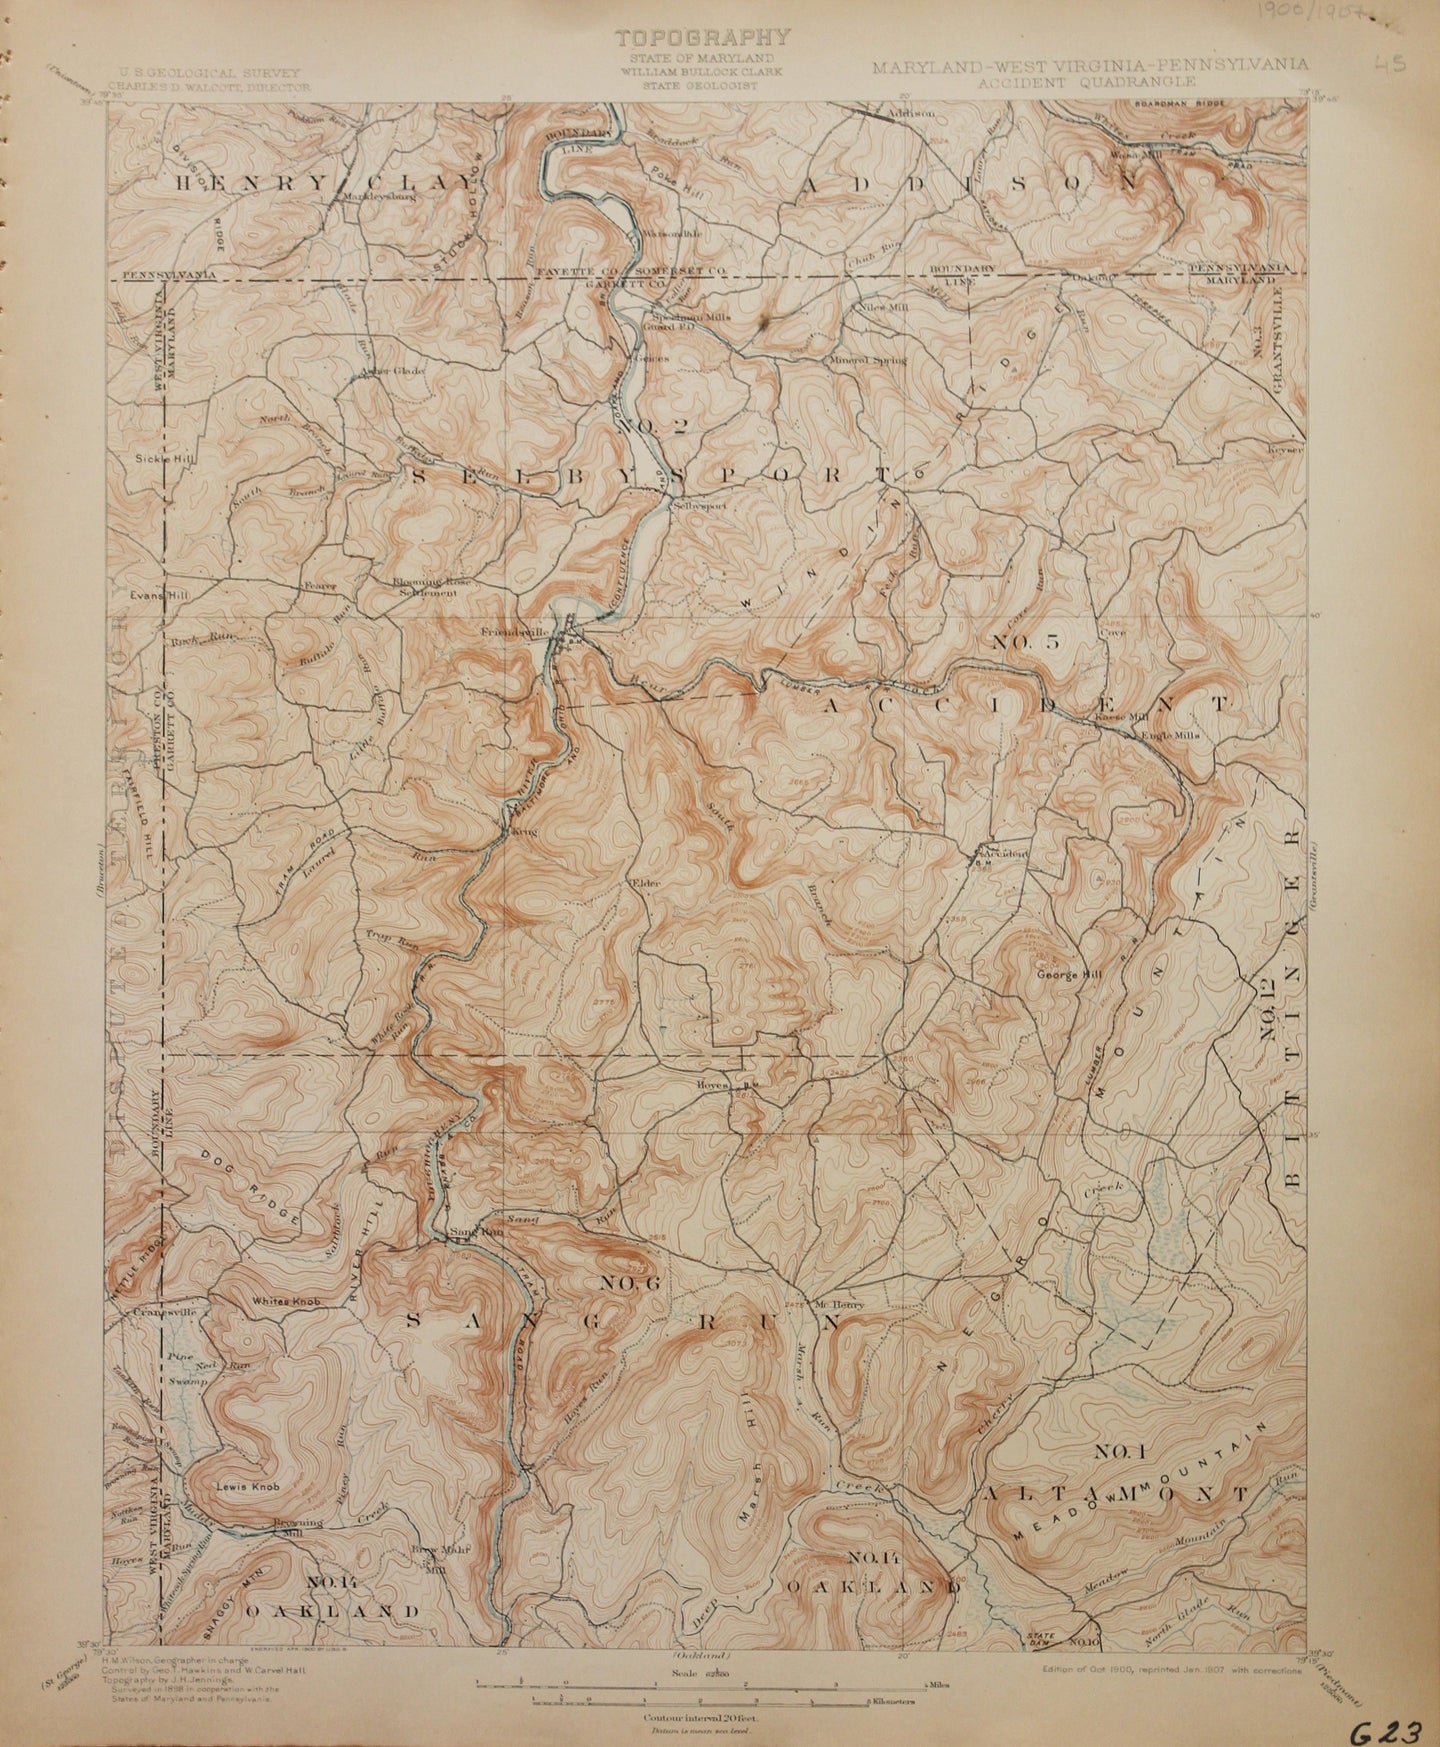 Genuine-Antique-Map-Accident--Maryland-West-Virginia-Pennsylvania--1907-U-S-Geological-Survey--Maps-Of-Antiquity